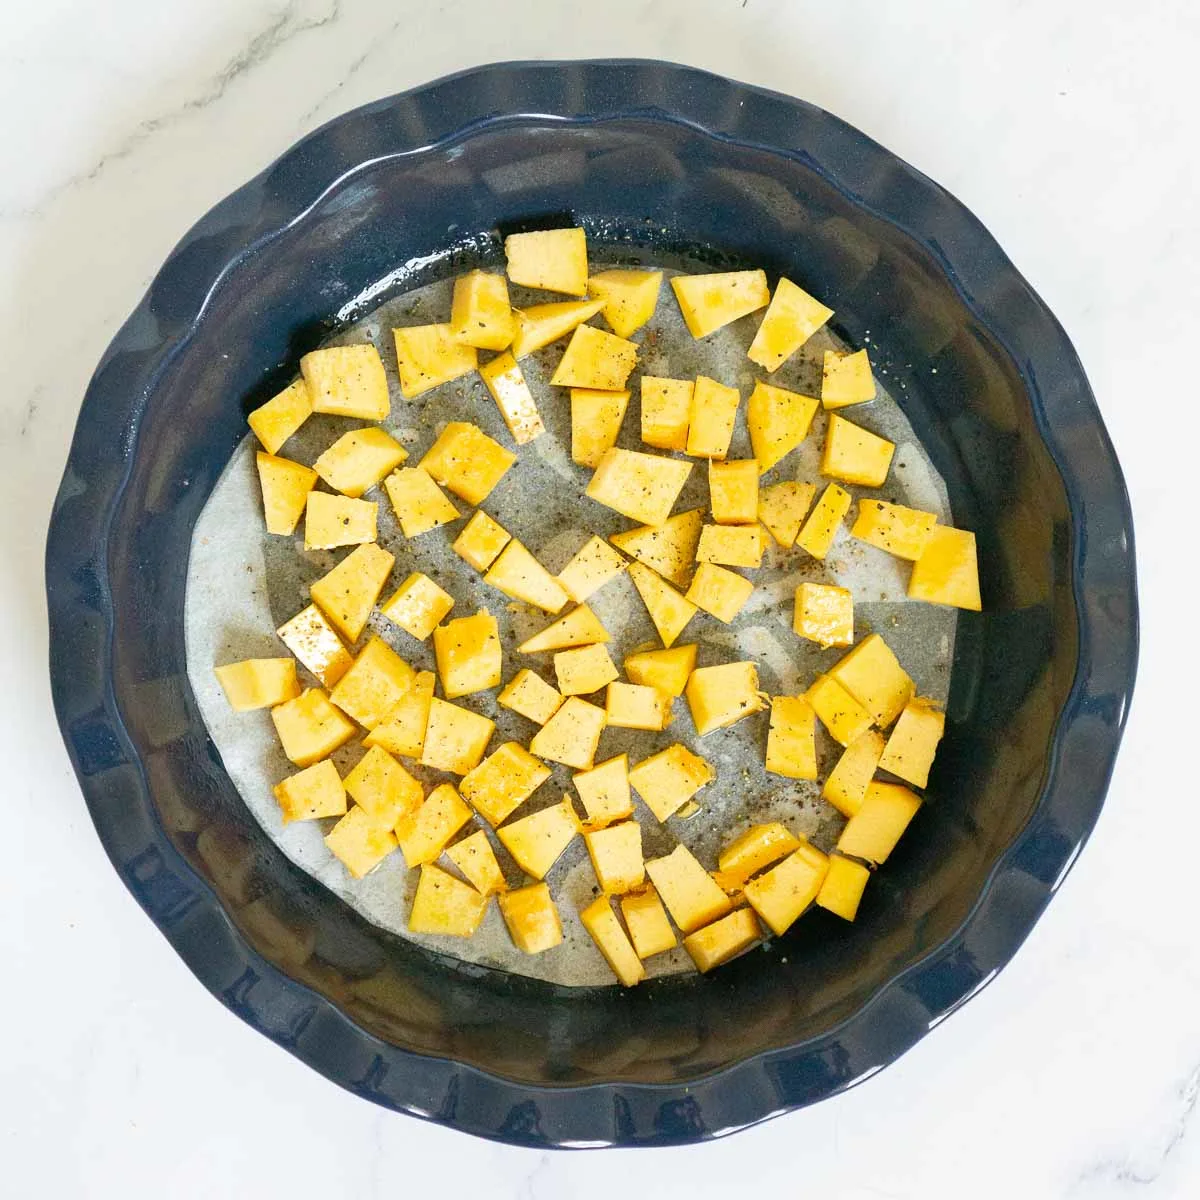 Cubed pumpkin in a pie dish ready to be roasted